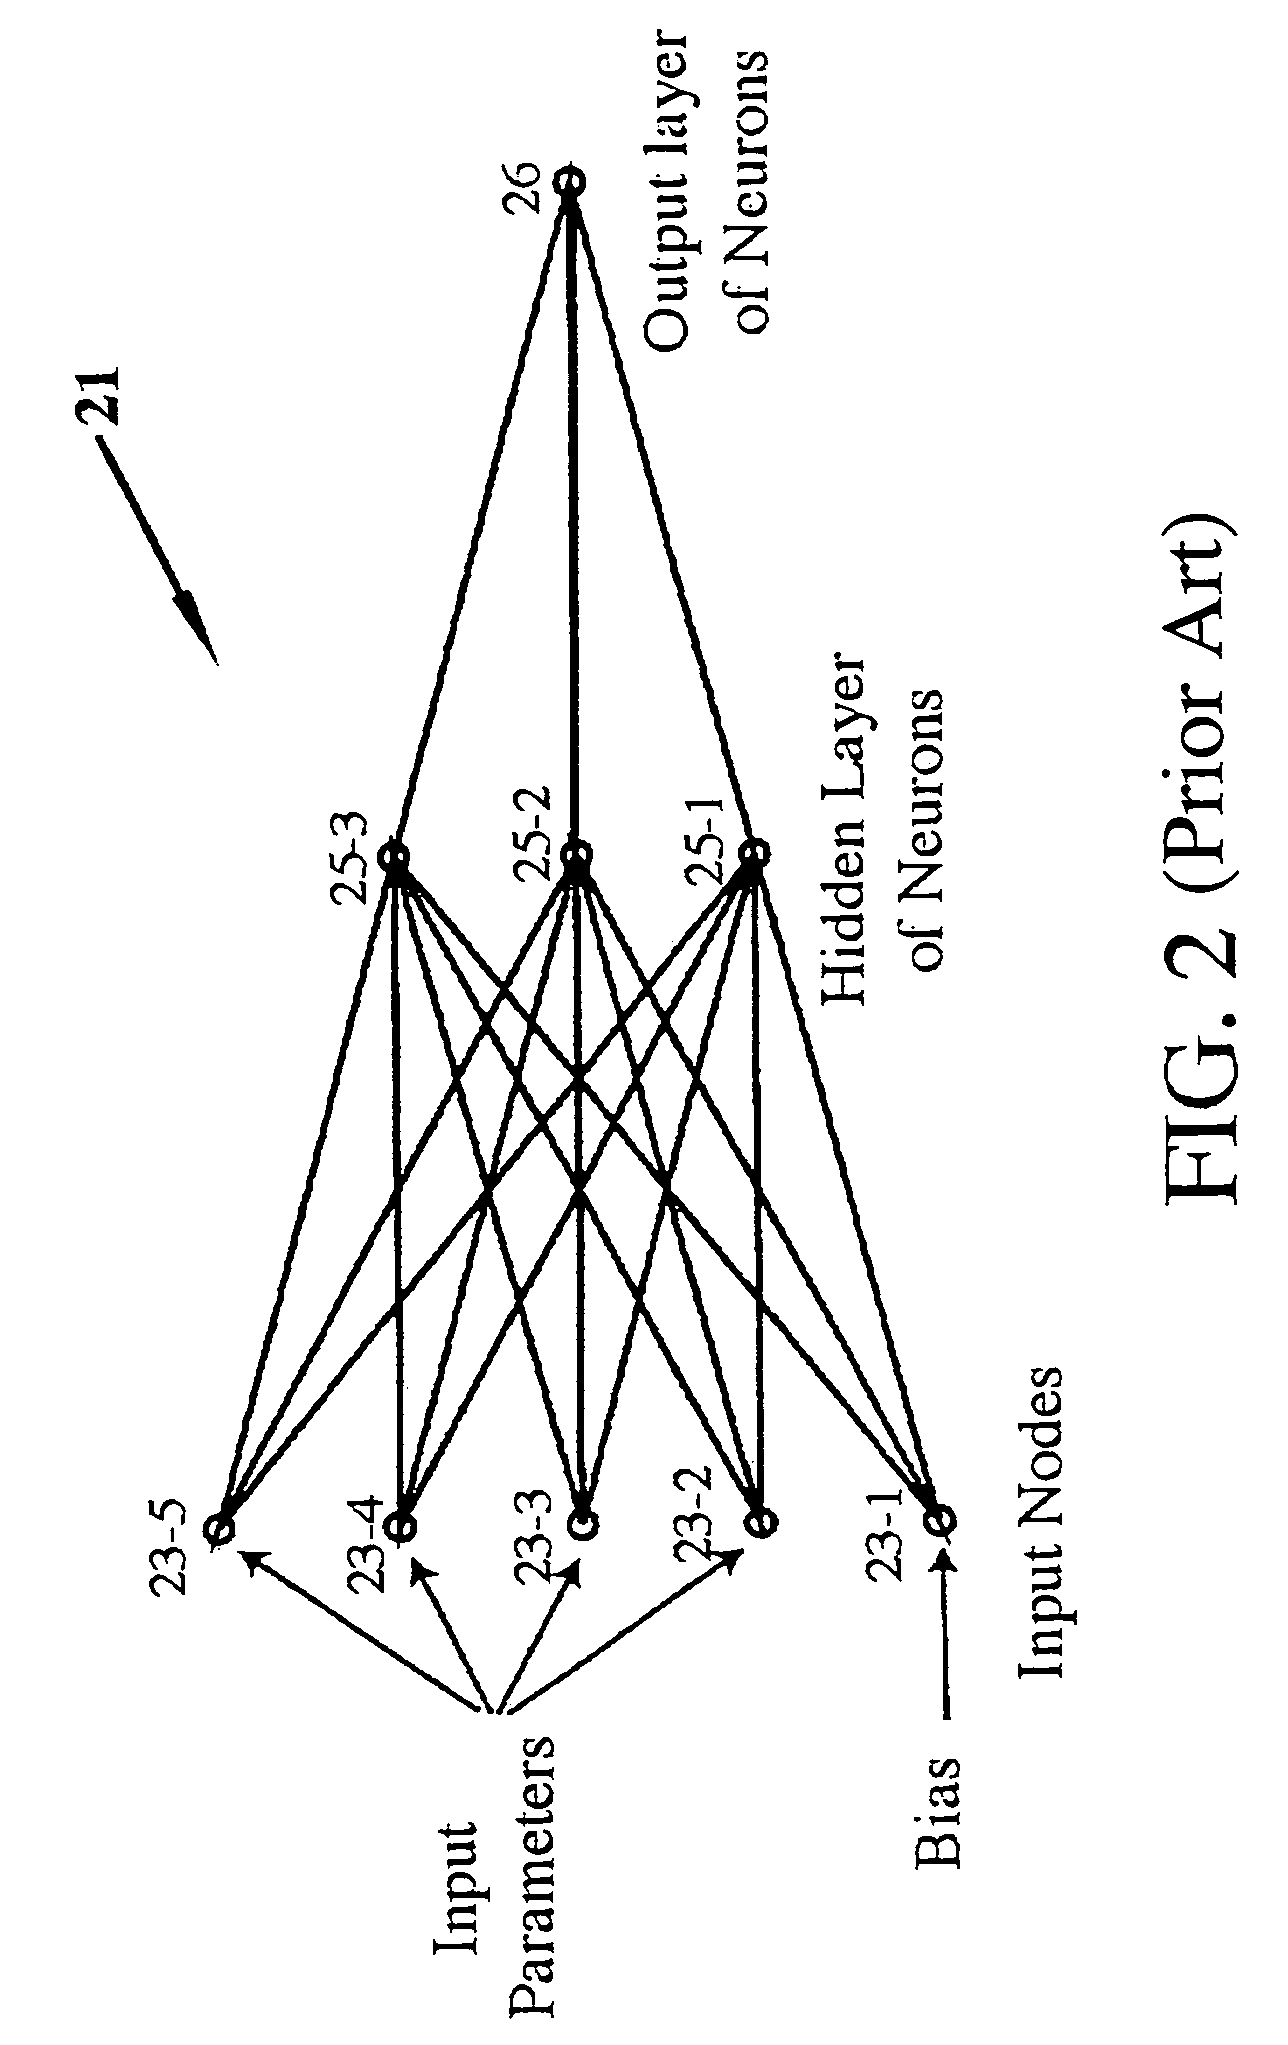 Hybrid neural network and support vector machine method for optimization